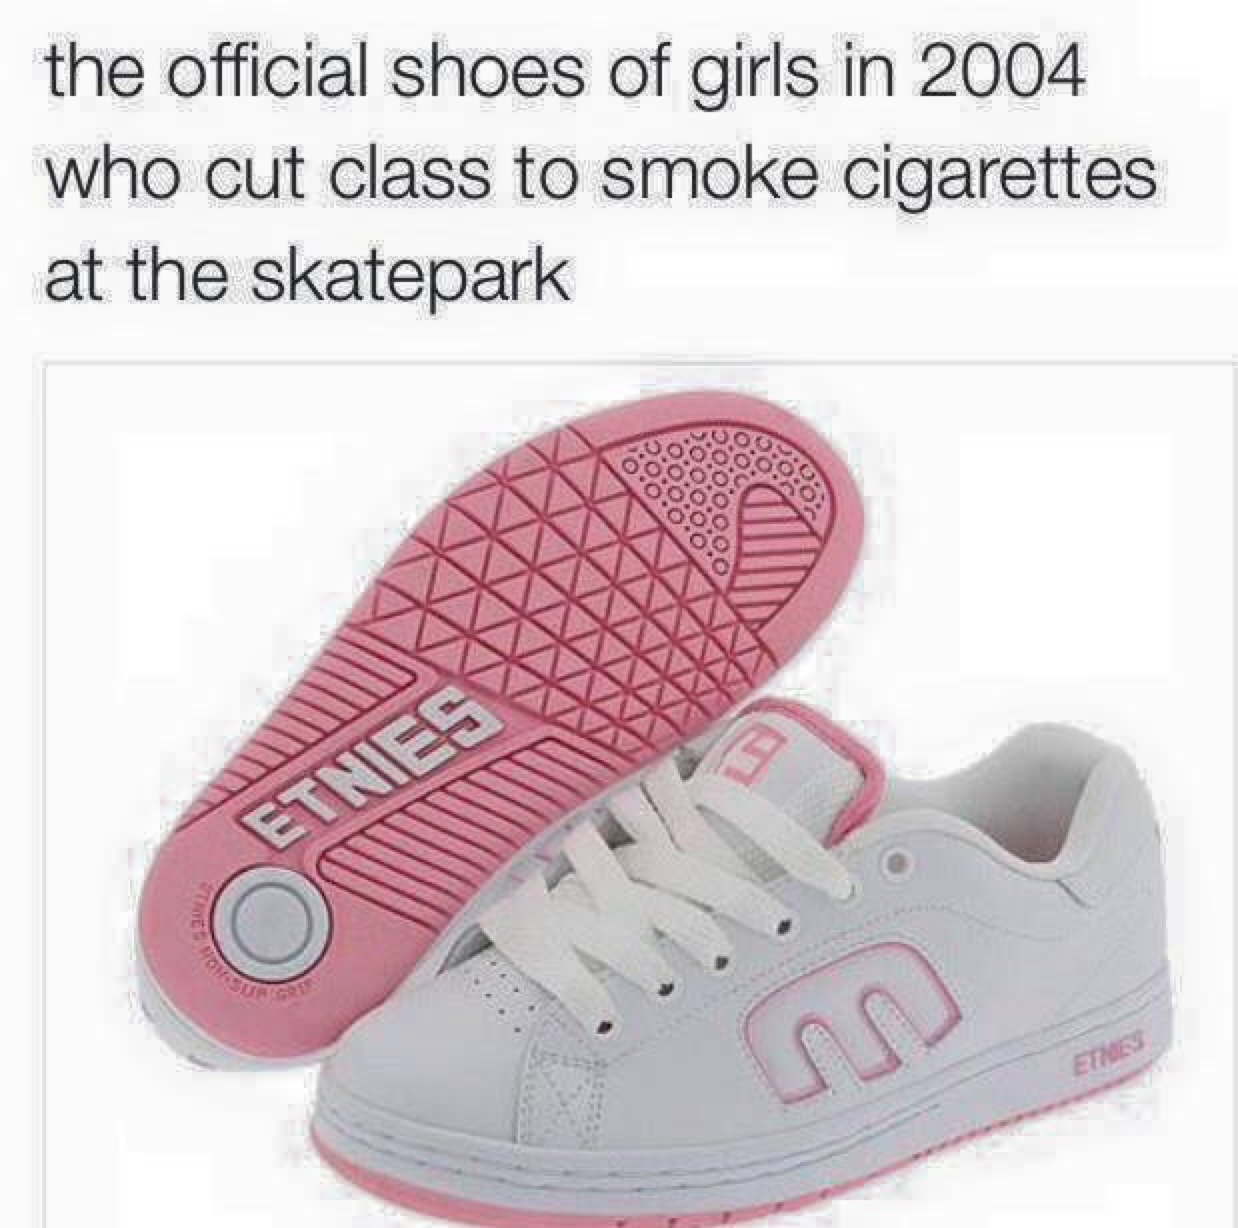 tweet - etnies 2005 - the official shoes of girls in 2004 who cut class to smoke cigarettes at the skatepark Etnes Etus